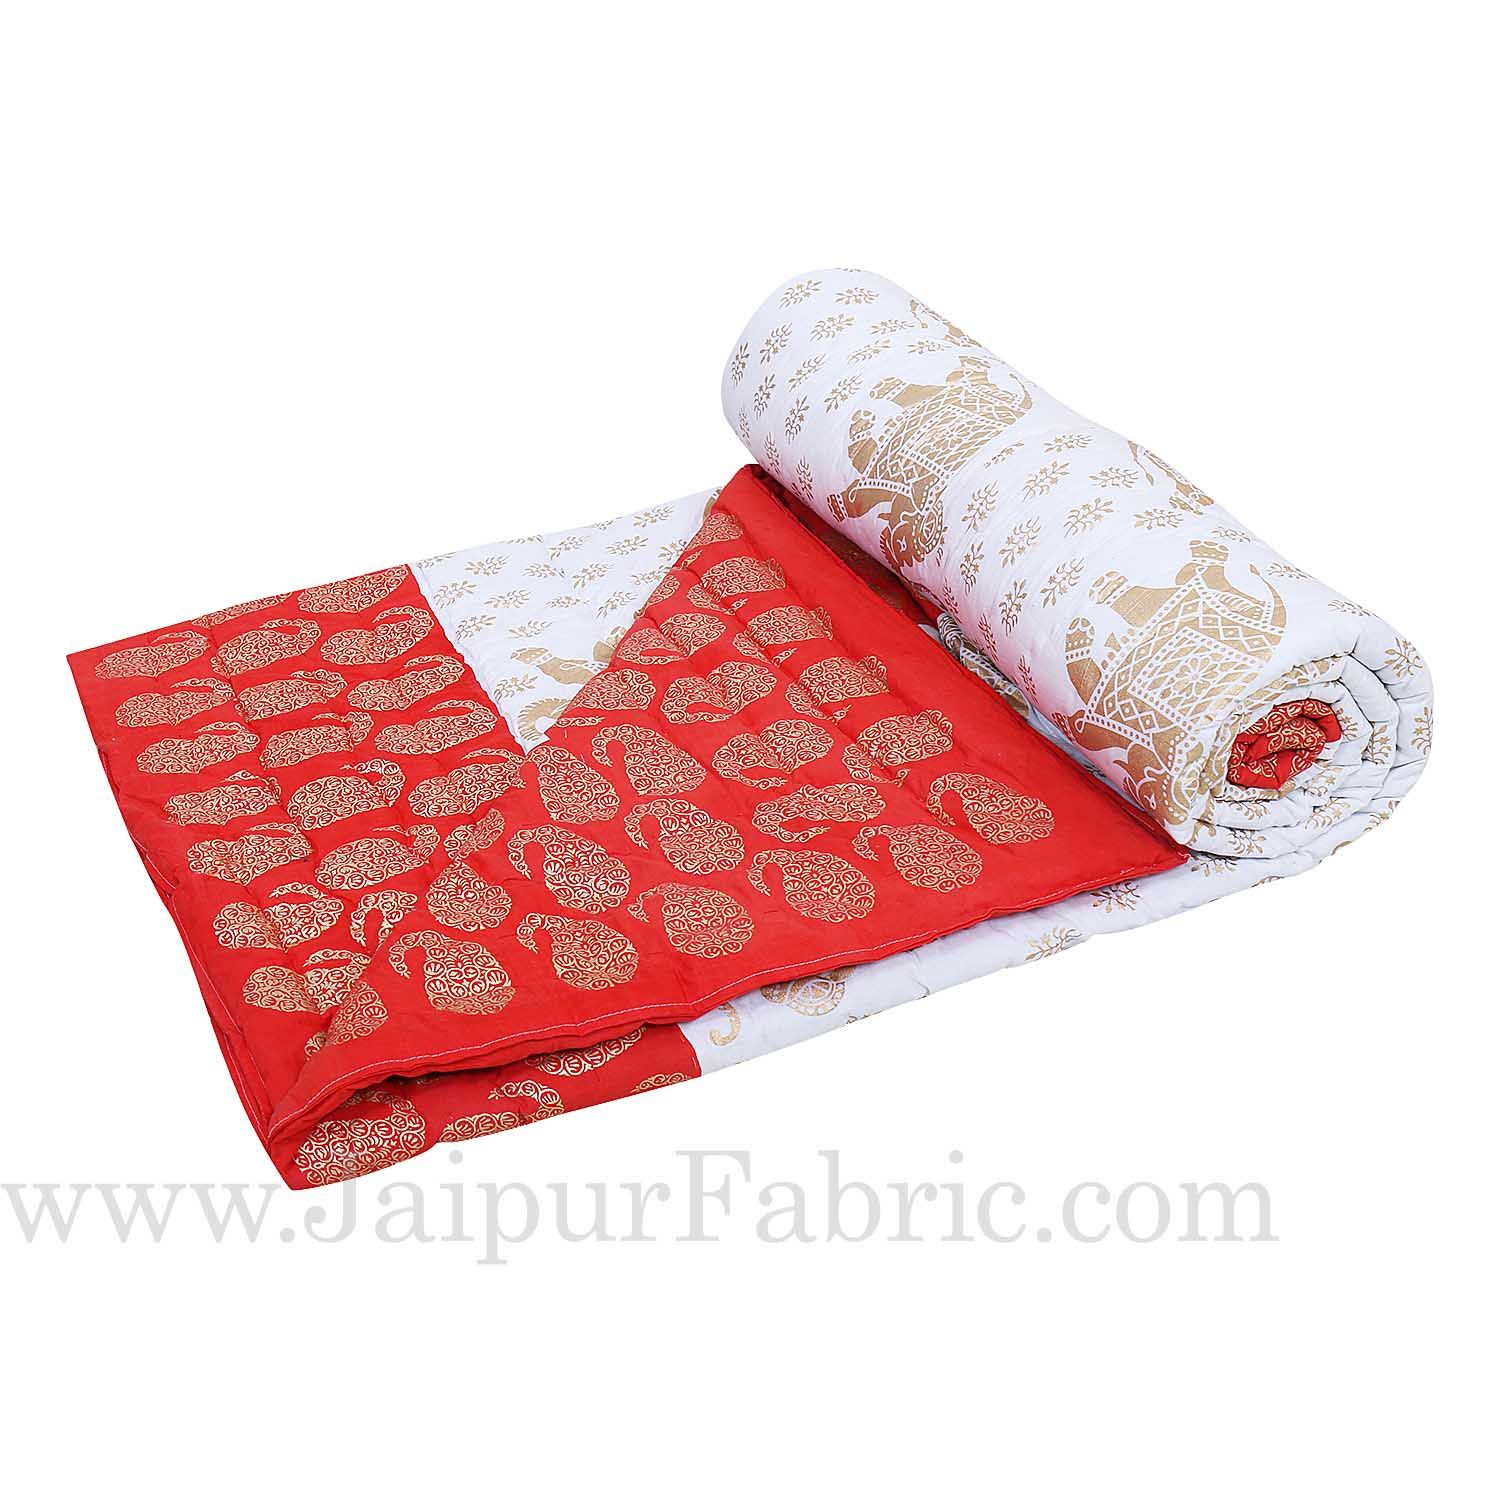 Red Border  Cream Base  With Golden Print Elephant Print Super Fine Cotton Voile(Mulmul) Both Side Printed Cotton Double Bed Quilt